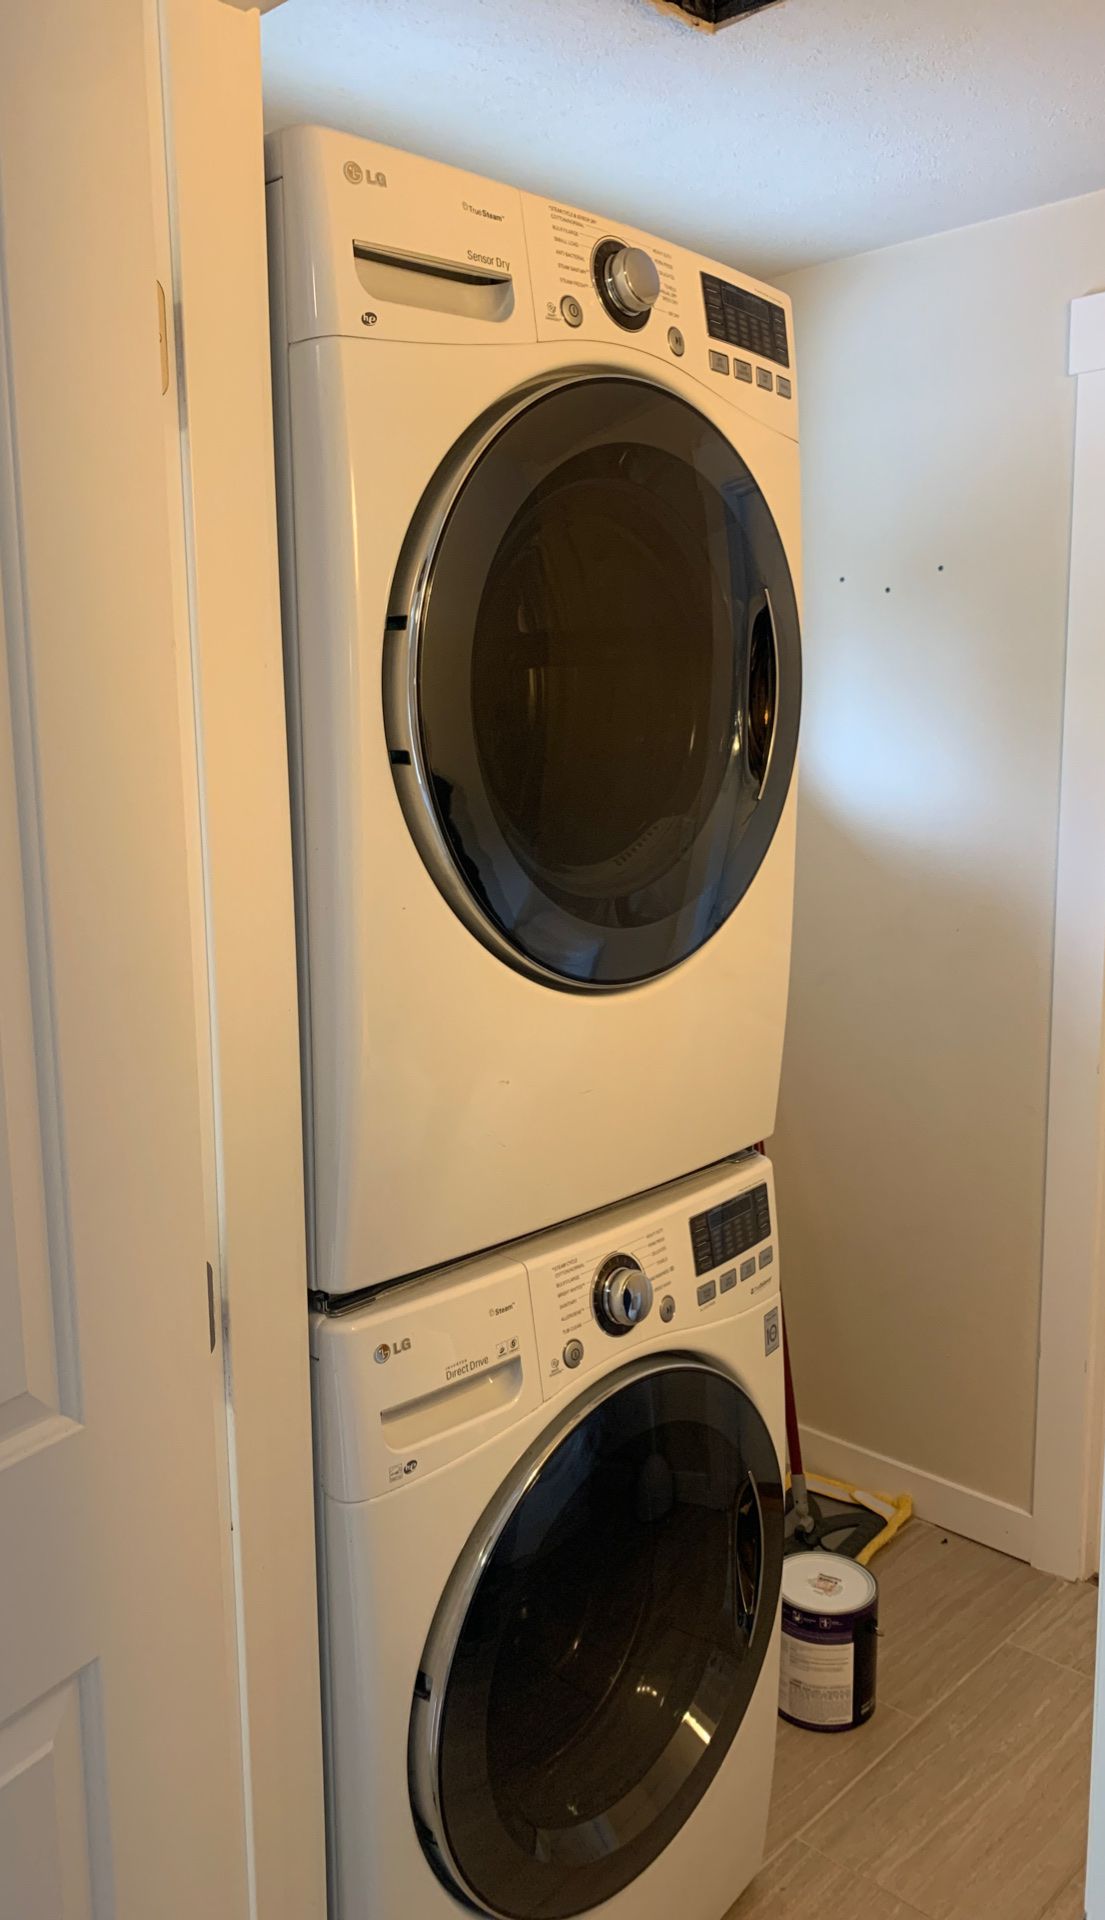 2015 LG stackable washer and dryer.